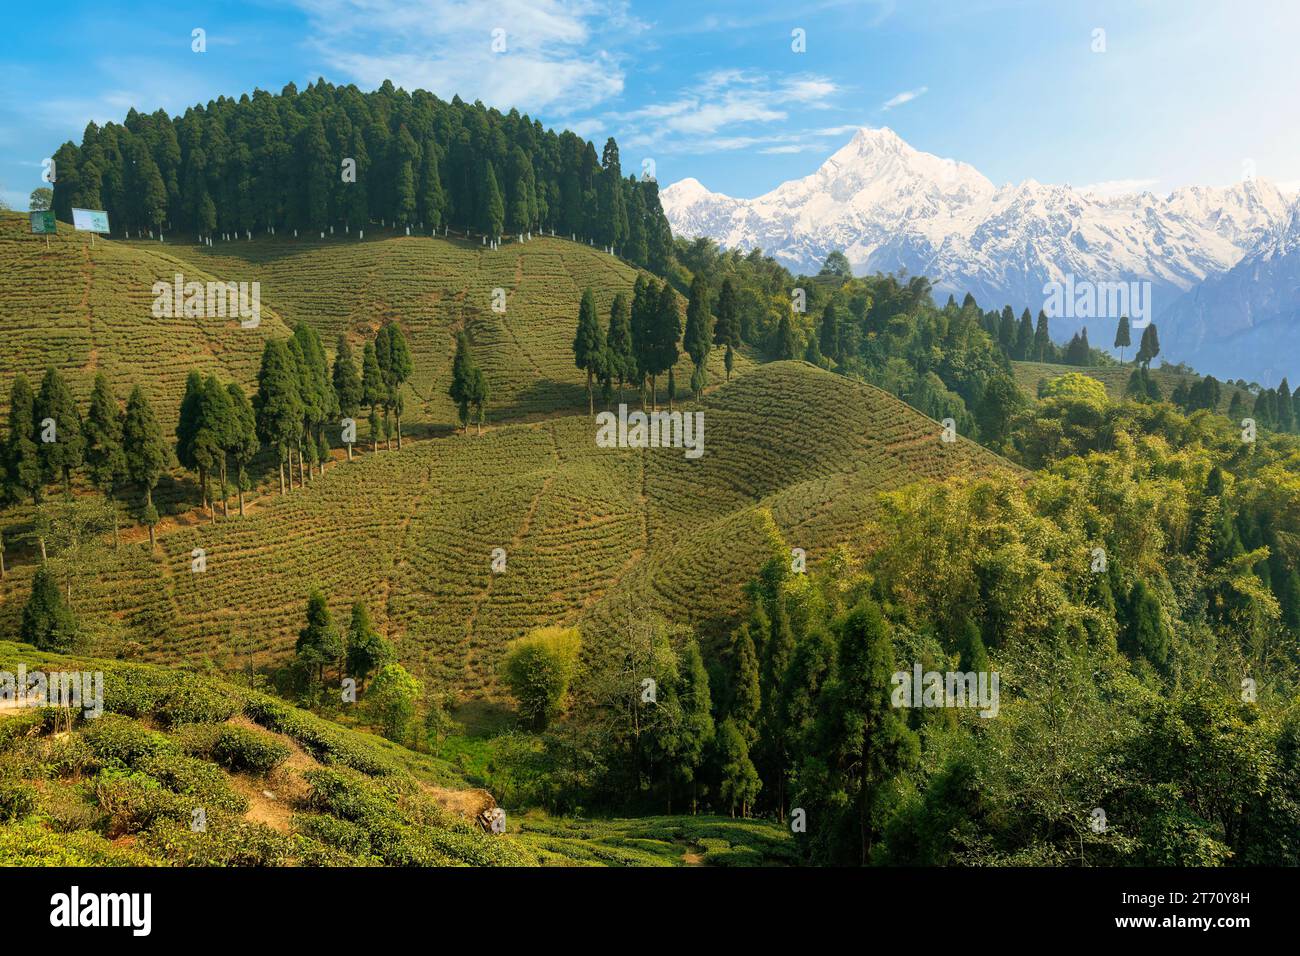 Scenic hilly landscape with view of tea plantations on the mountain slopes and the Kanchenjunga Himalaya range at Tinchuley, Darjeeling, India Stock Photo